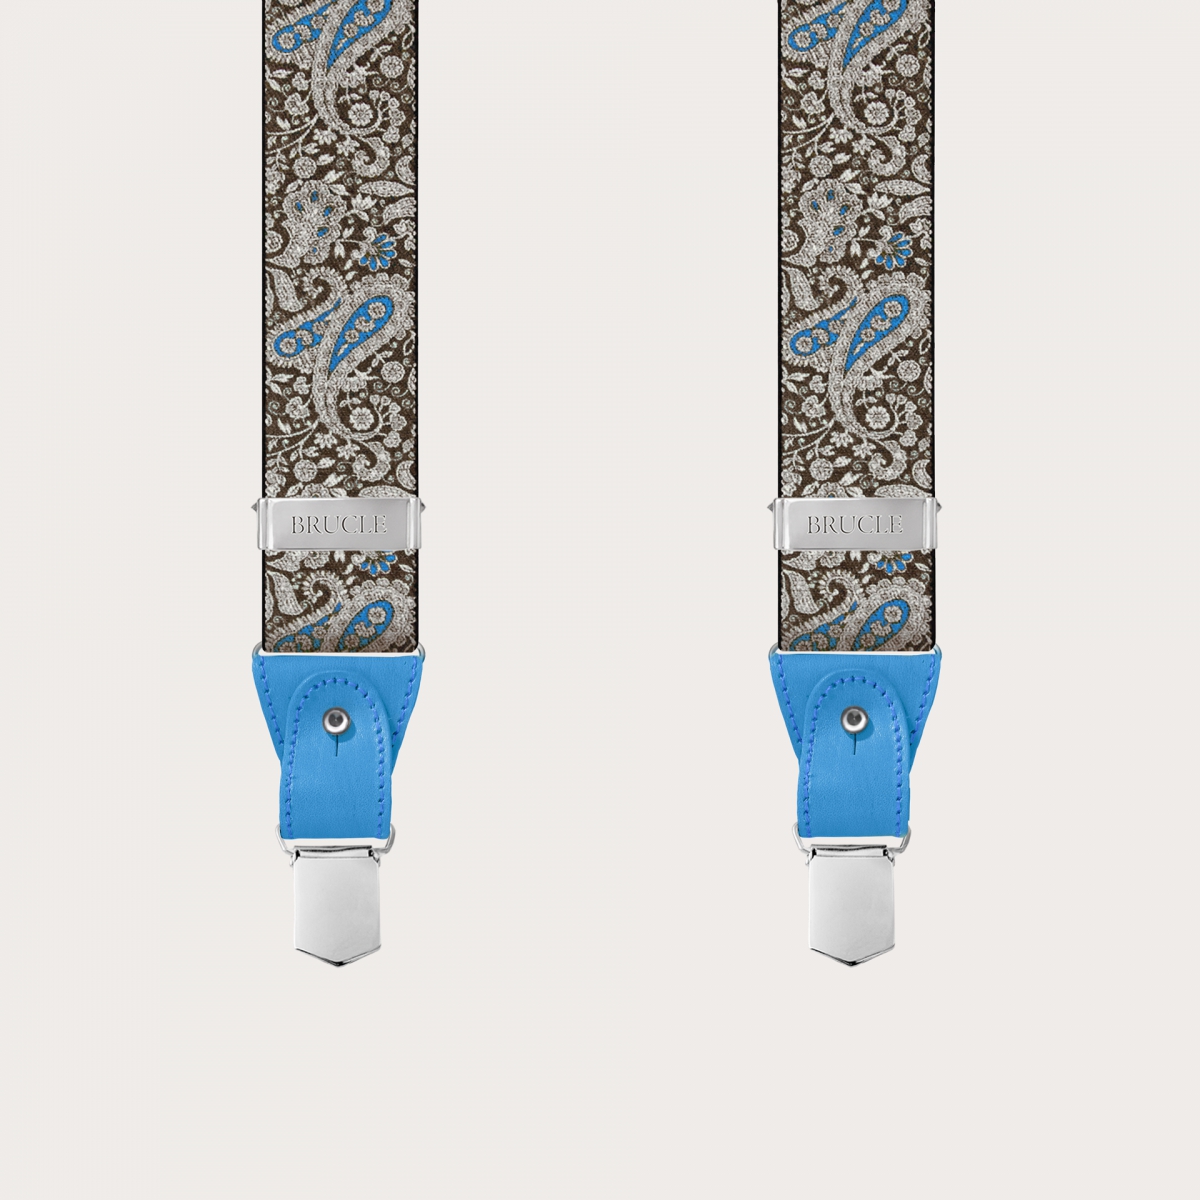 BRUCLE Double use suspenders in brown and blue paisley pattern